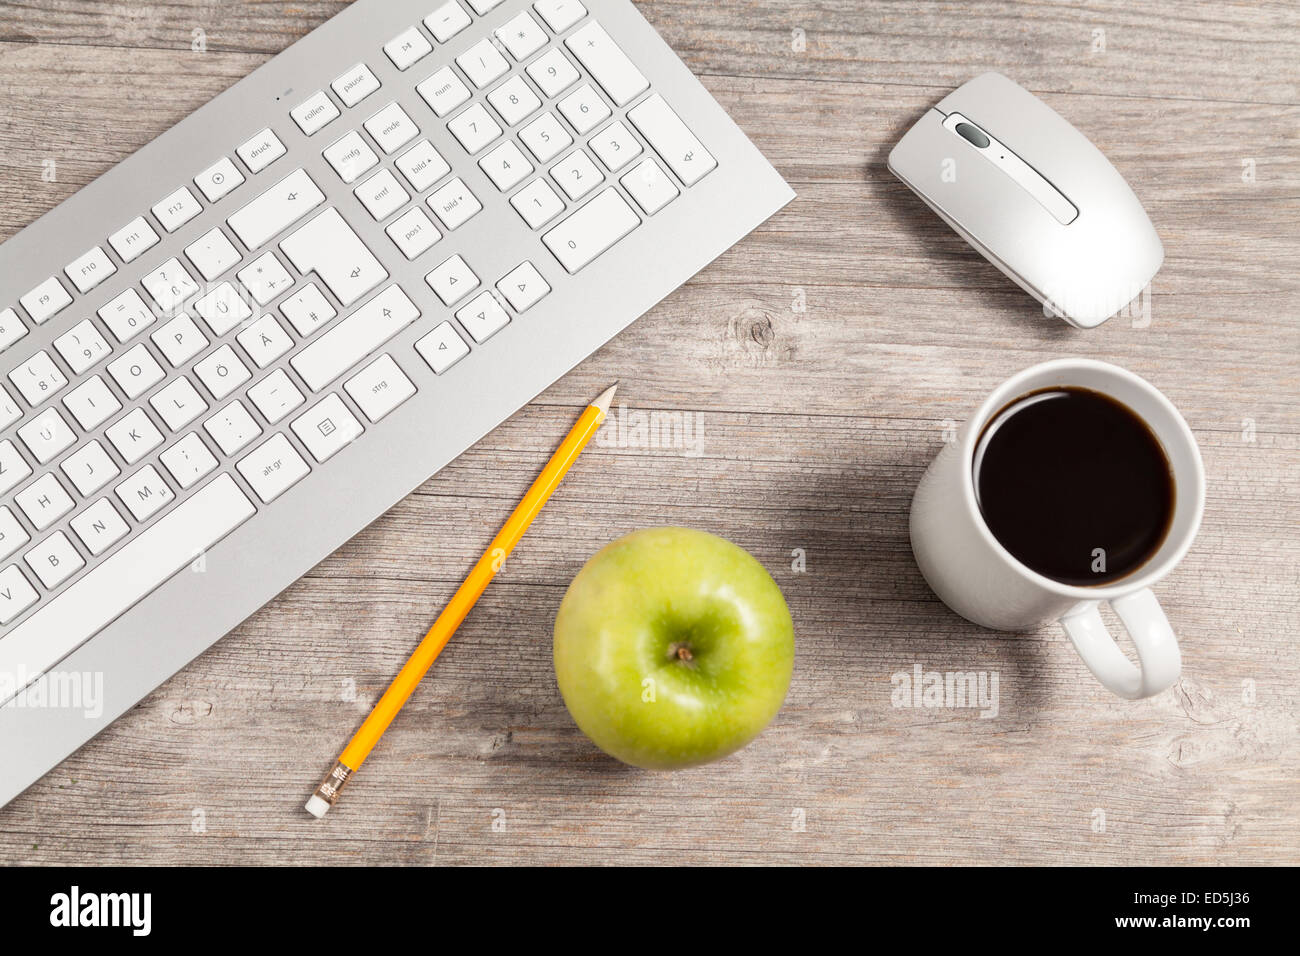 desk with keyboard and mouse and green apple Stock Photo